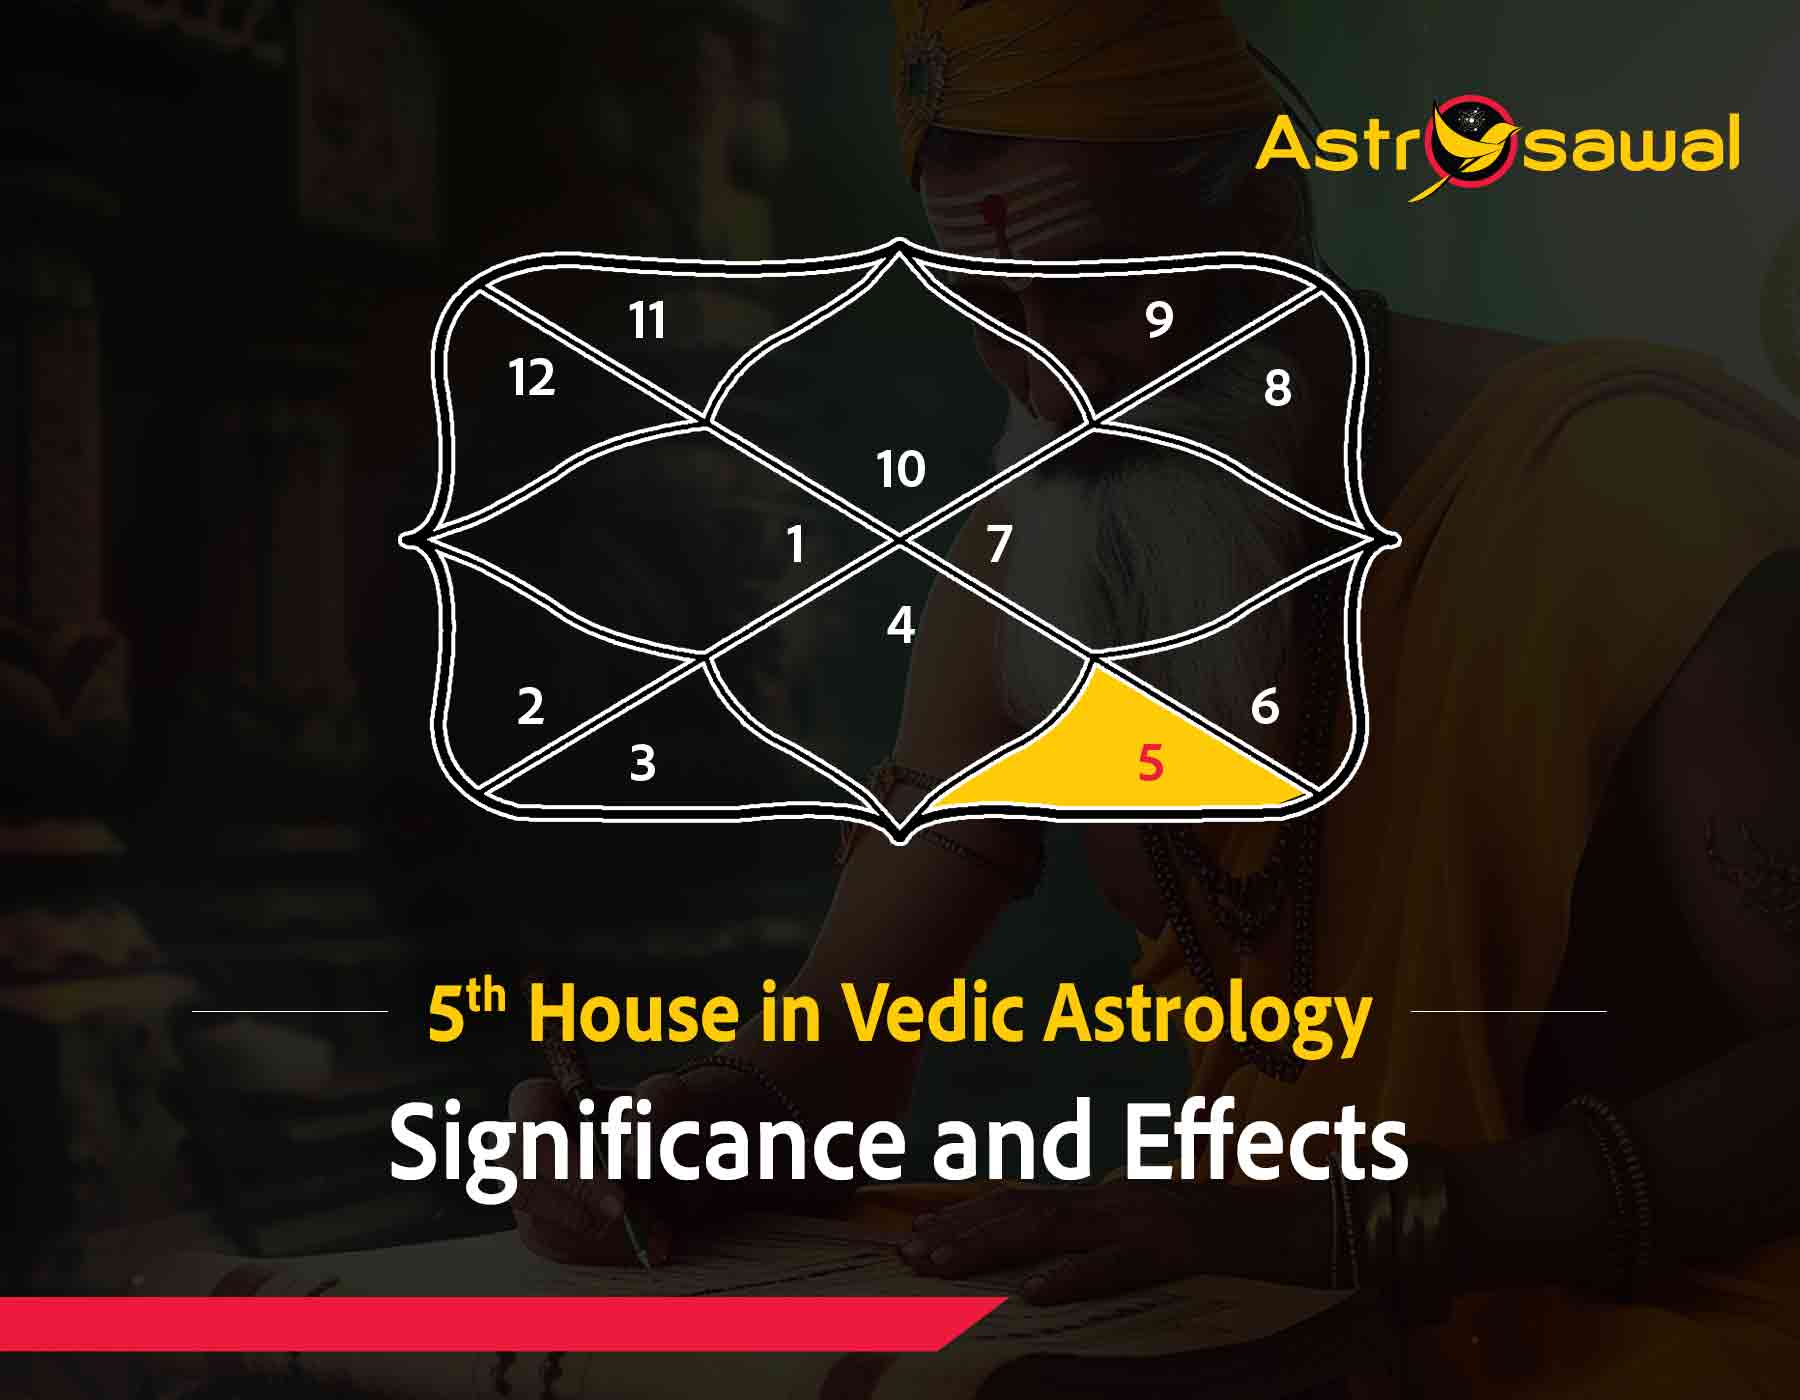 5th House in Vedic Astrology, Significance and Effects